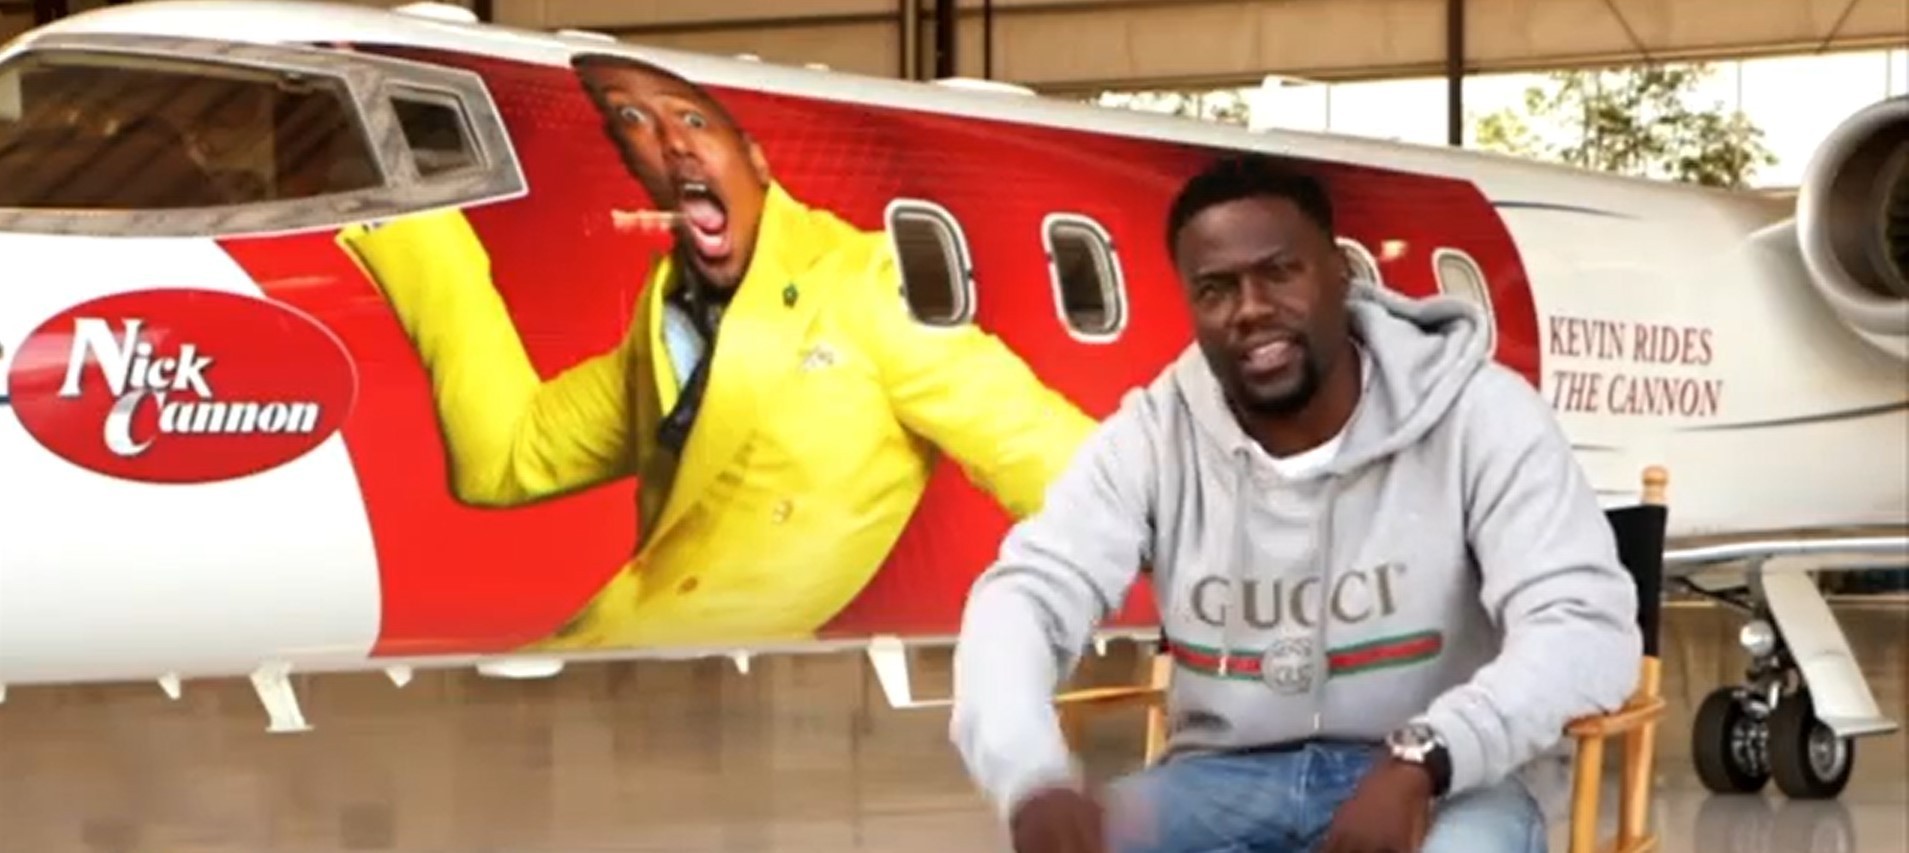 Nick Cannon Pranks Kevin Hart by Wrapping His Face On the Actor's ...